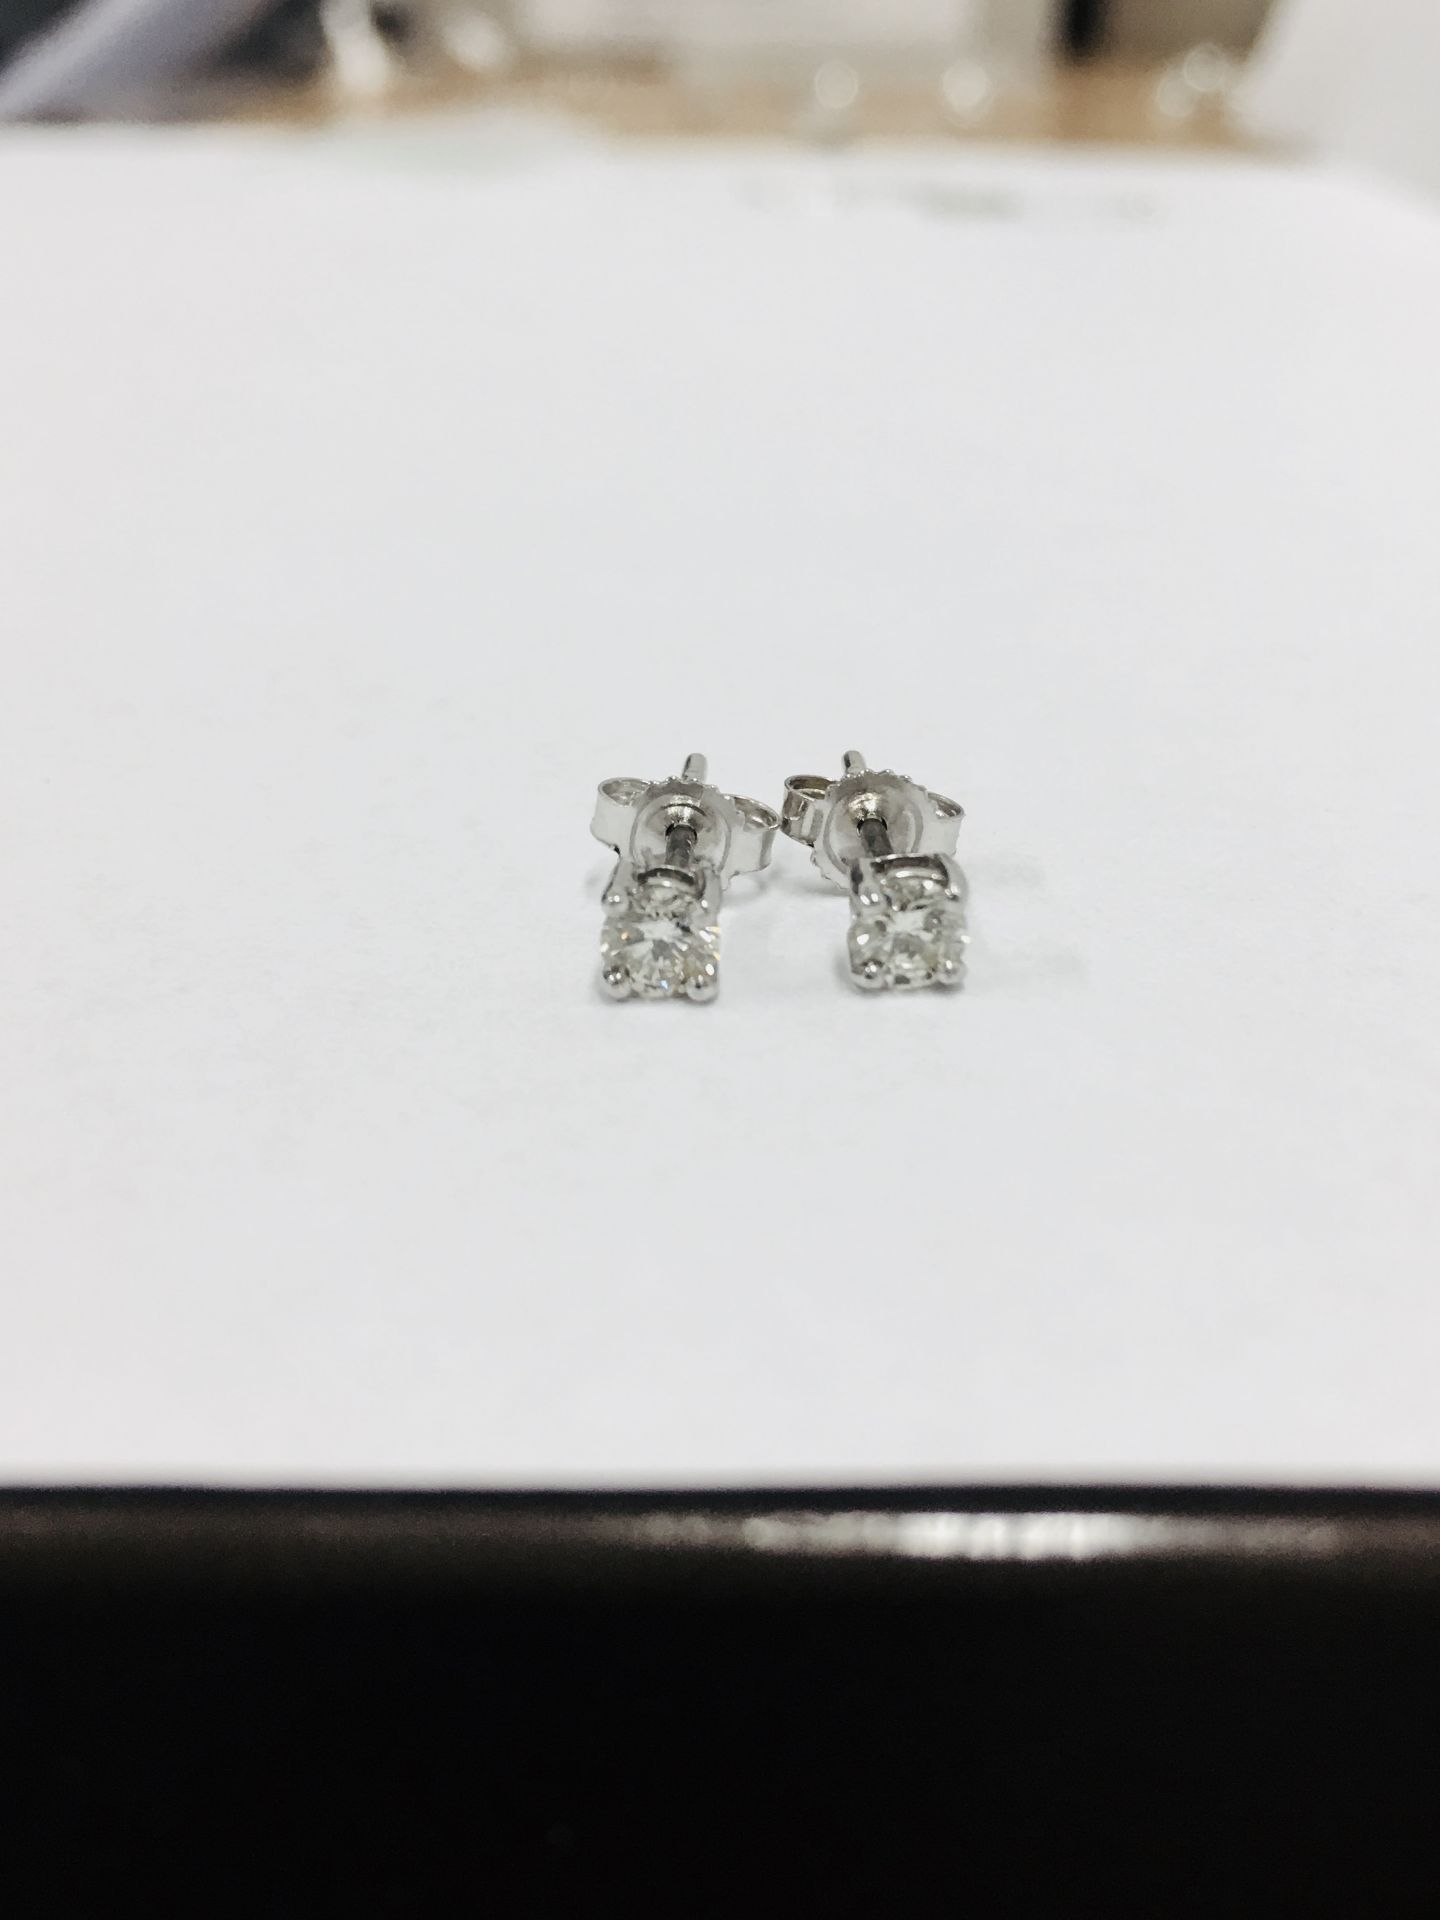 0.50ct diamond solitaire stud earrings set in platinum. I/J colour, si2 clarity.4 claw setting - Image 3 of 3